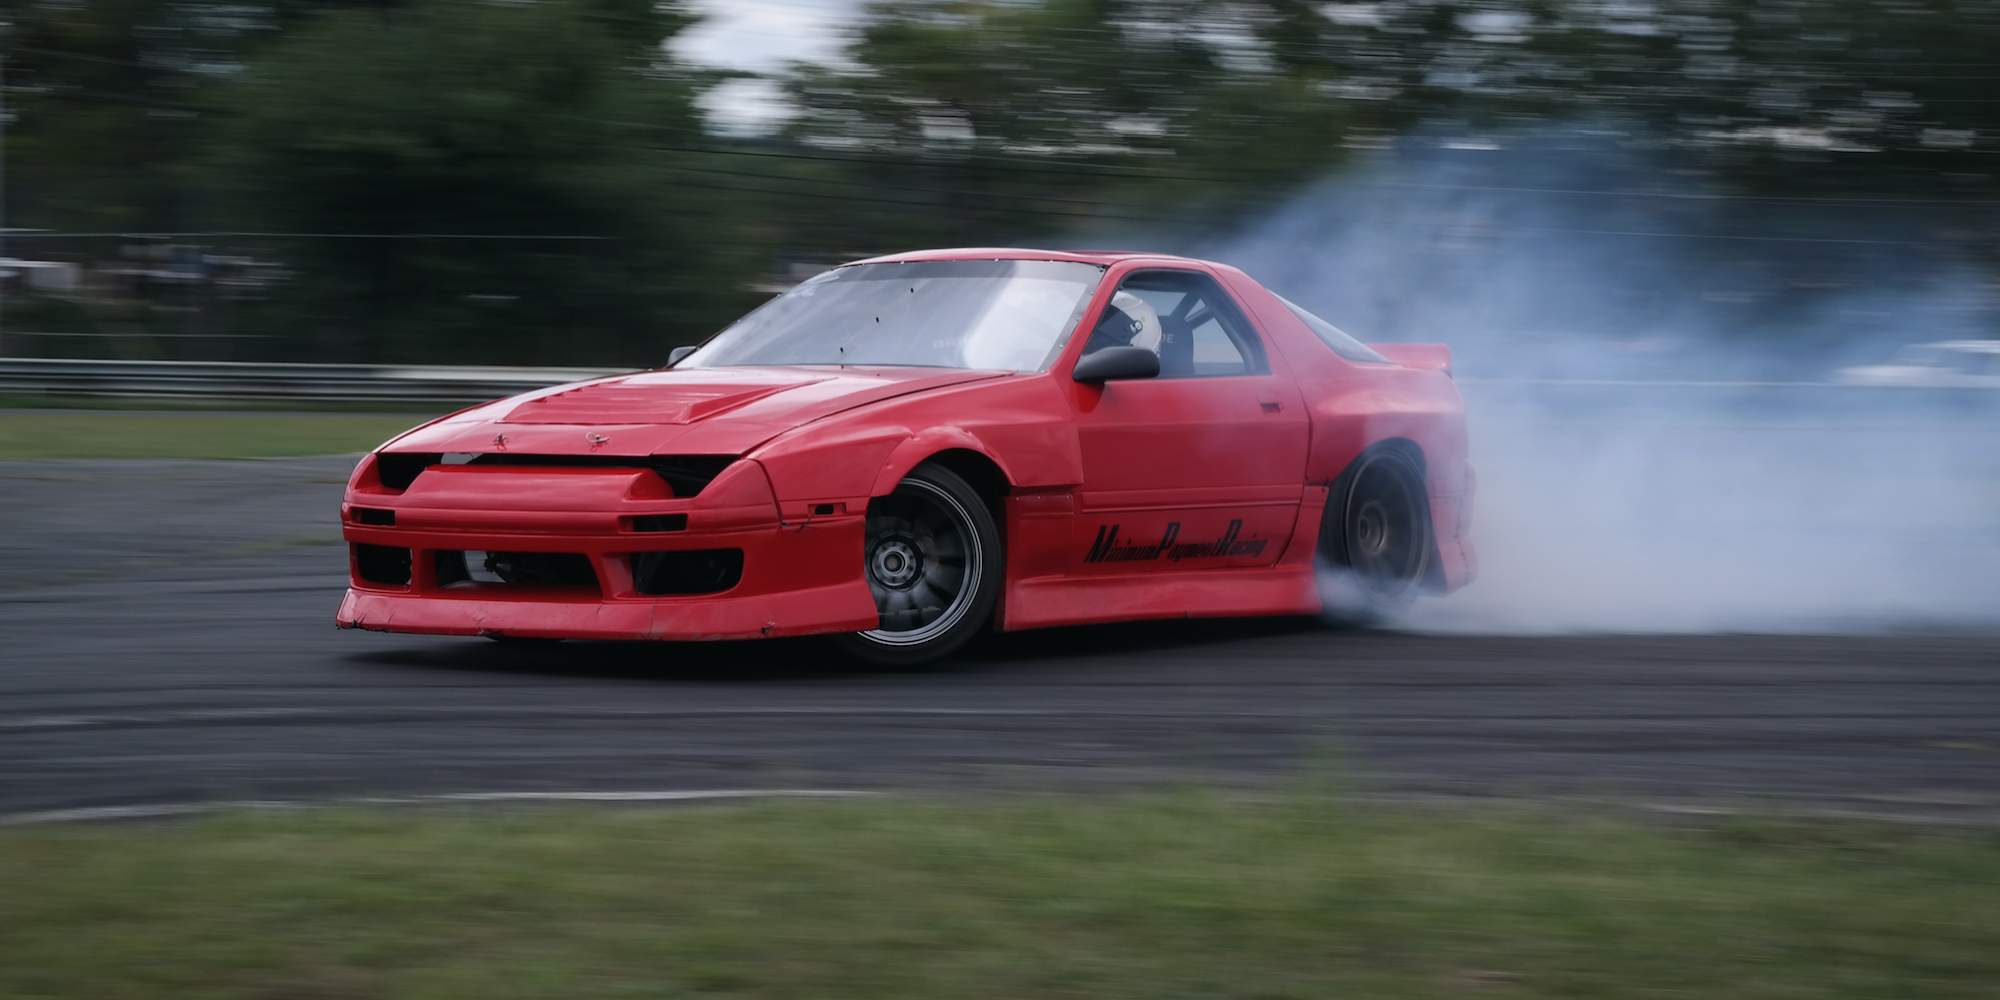 Turning Old Stock Cars Into Drift Cars Makes Perfect Sense